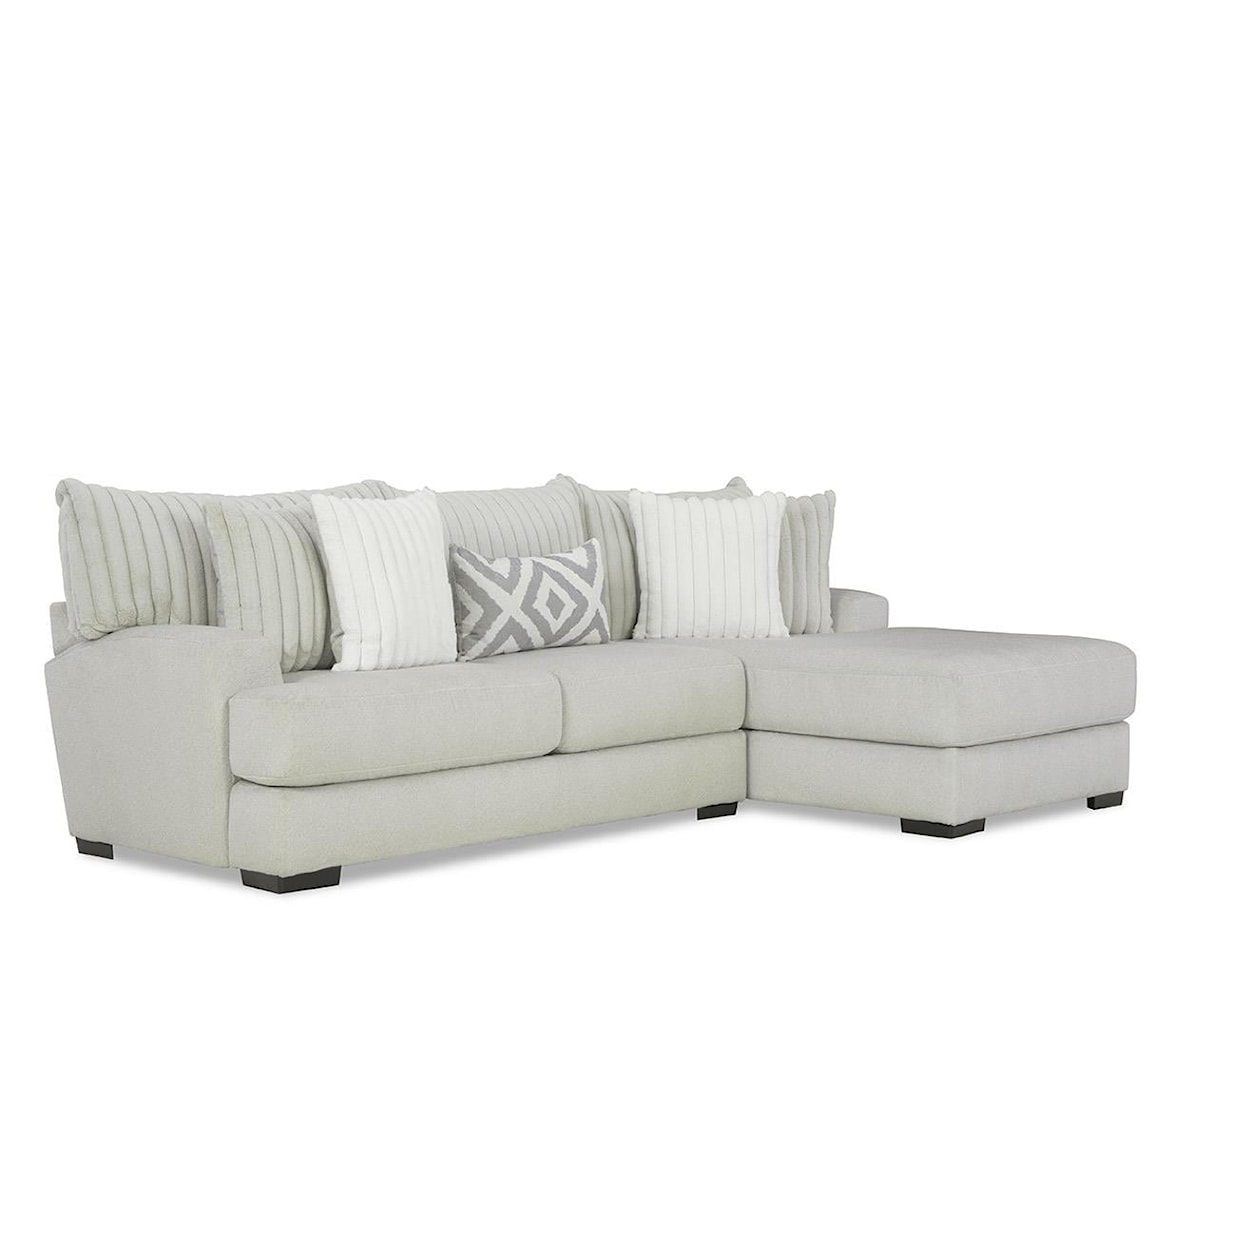 Albany 938 Tweed Silver 2-Piece Sectional Sofa